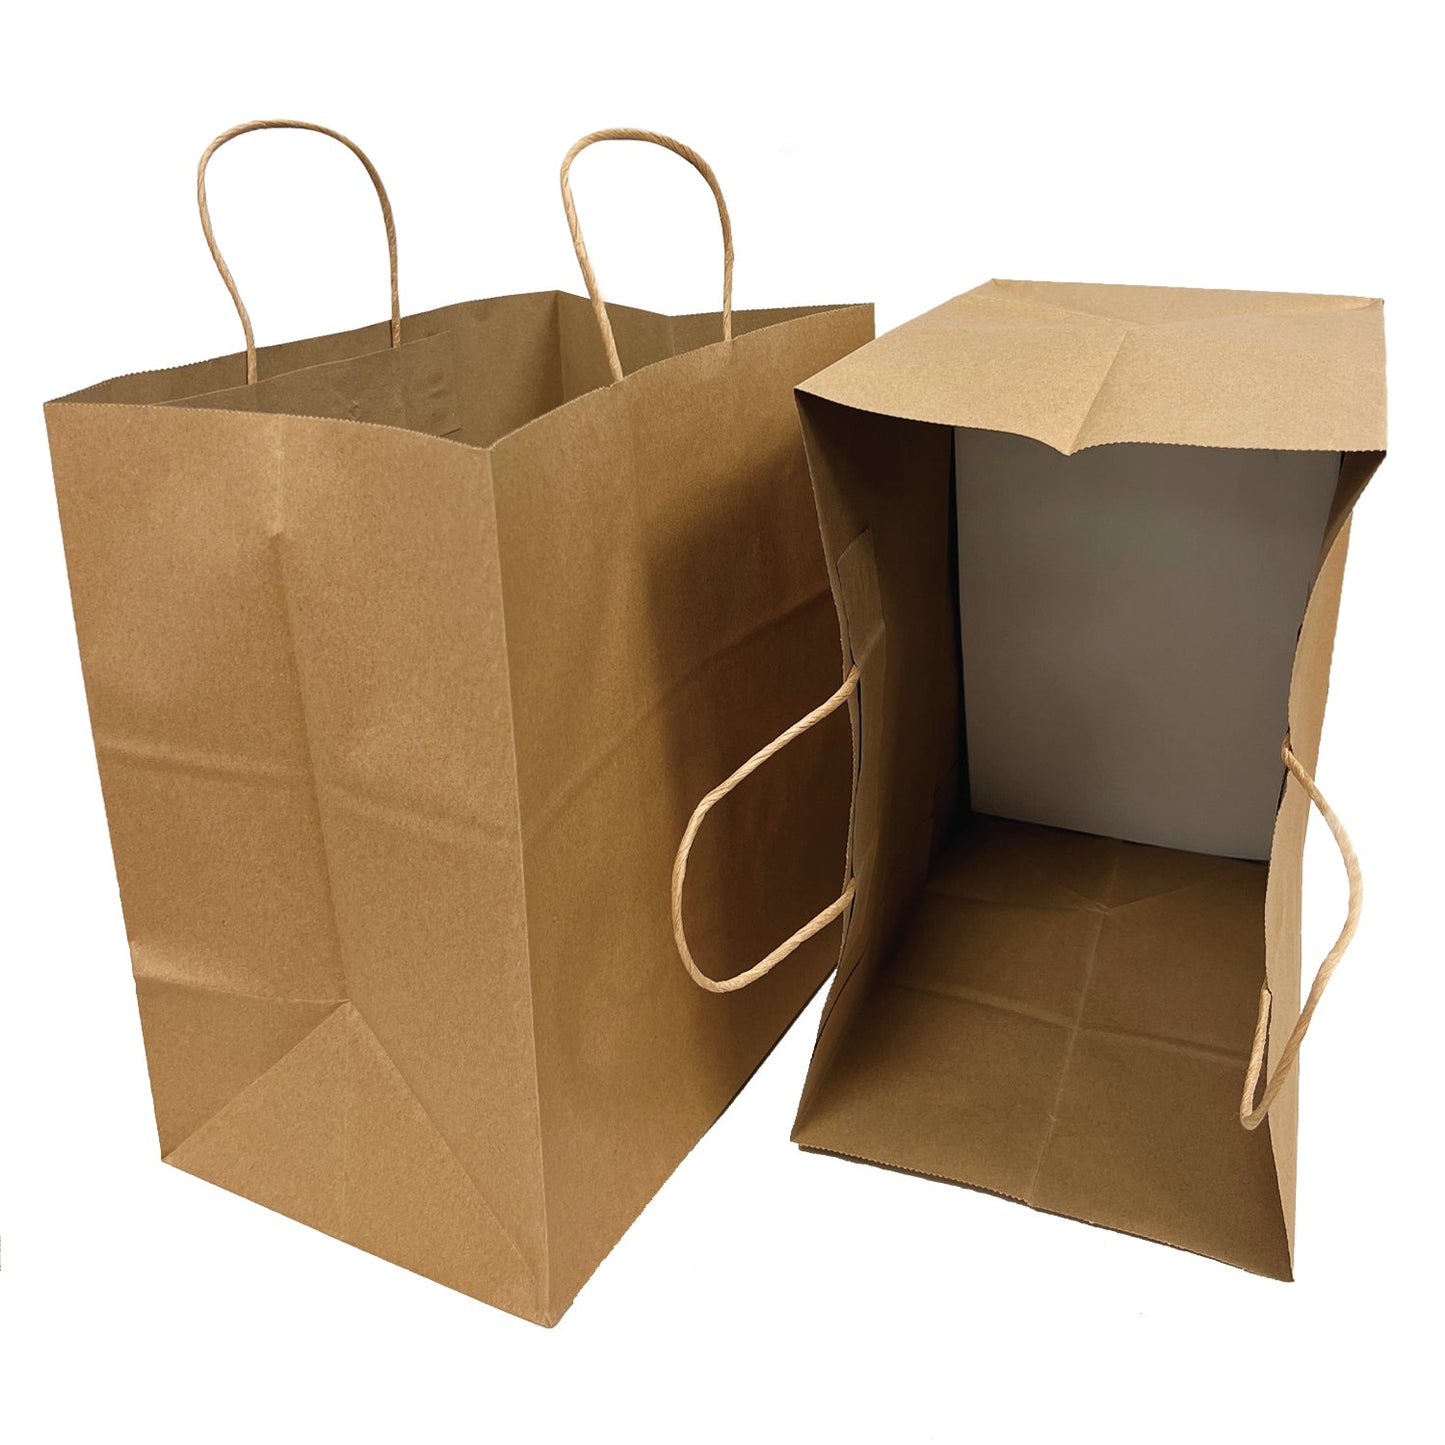 1383B | 200pcs Take Out 13x8x13 inches Kraft Paper Bag Cardboard Insert with Twisted Handles, $0.56/pc